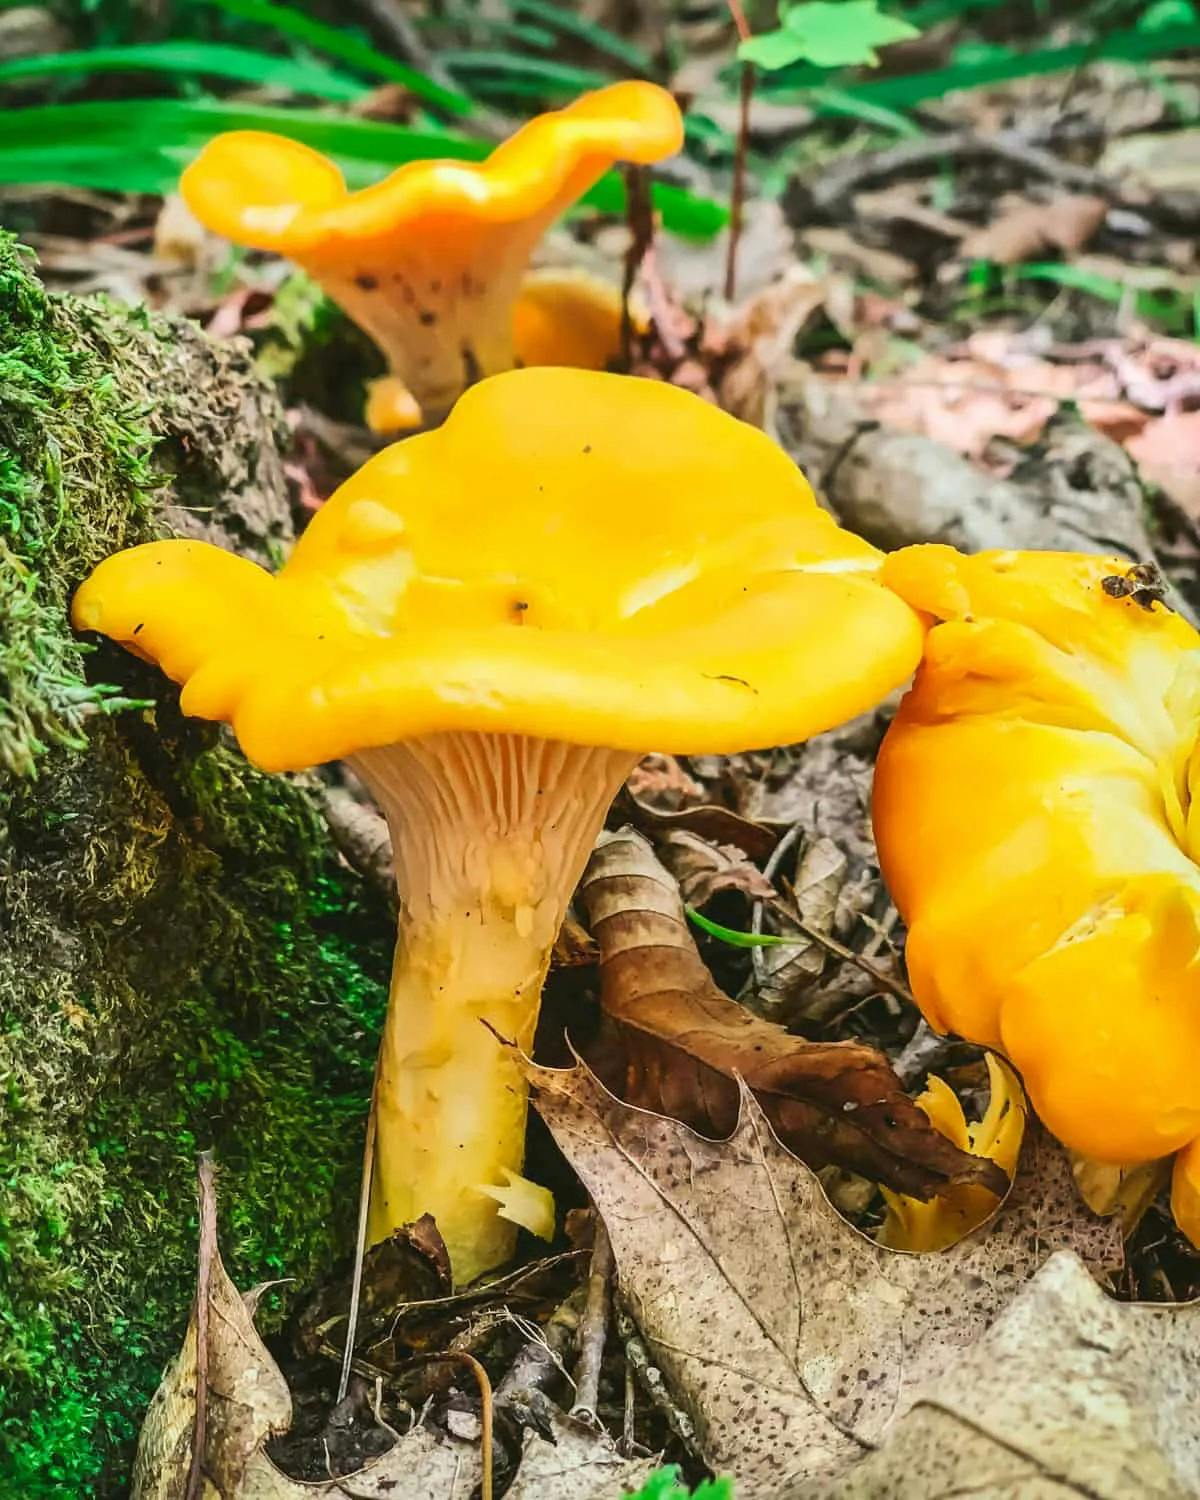   The Gleaming Gold Standard: How to Clean Chanterelle Mushrooms to Perfection